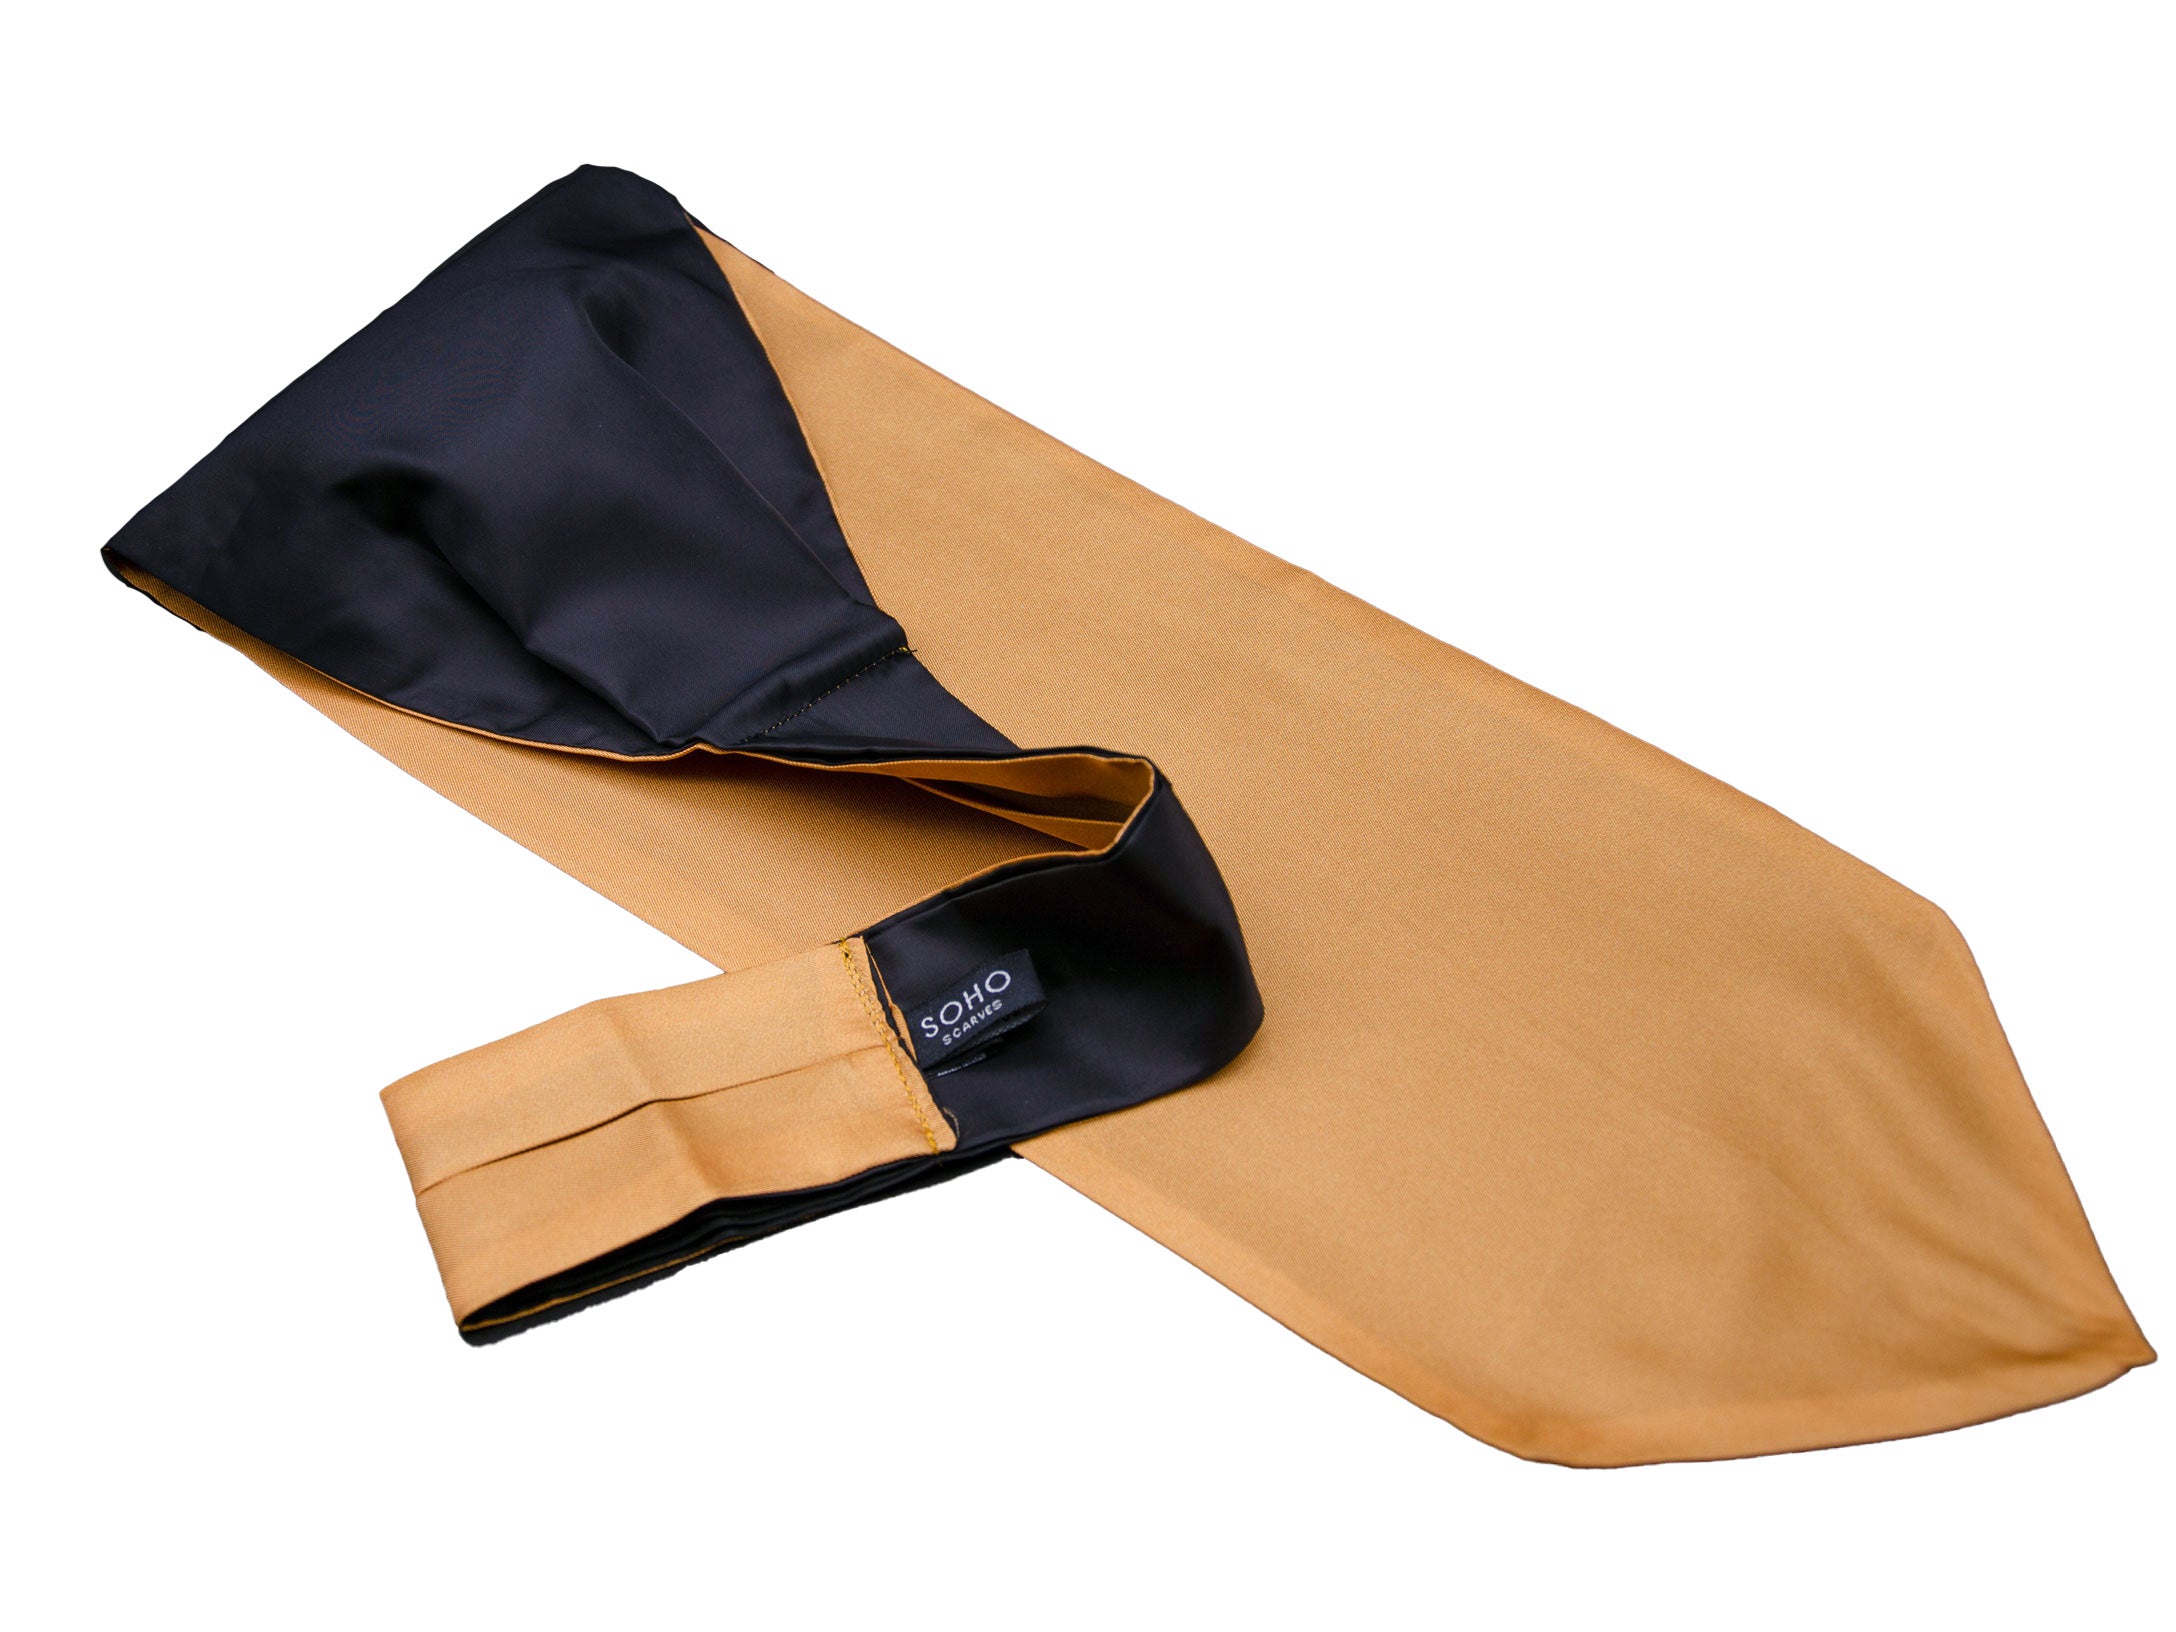 Golden 'Mijas' single pointed Ascot tie arranged diagonally with wide point in foreground.